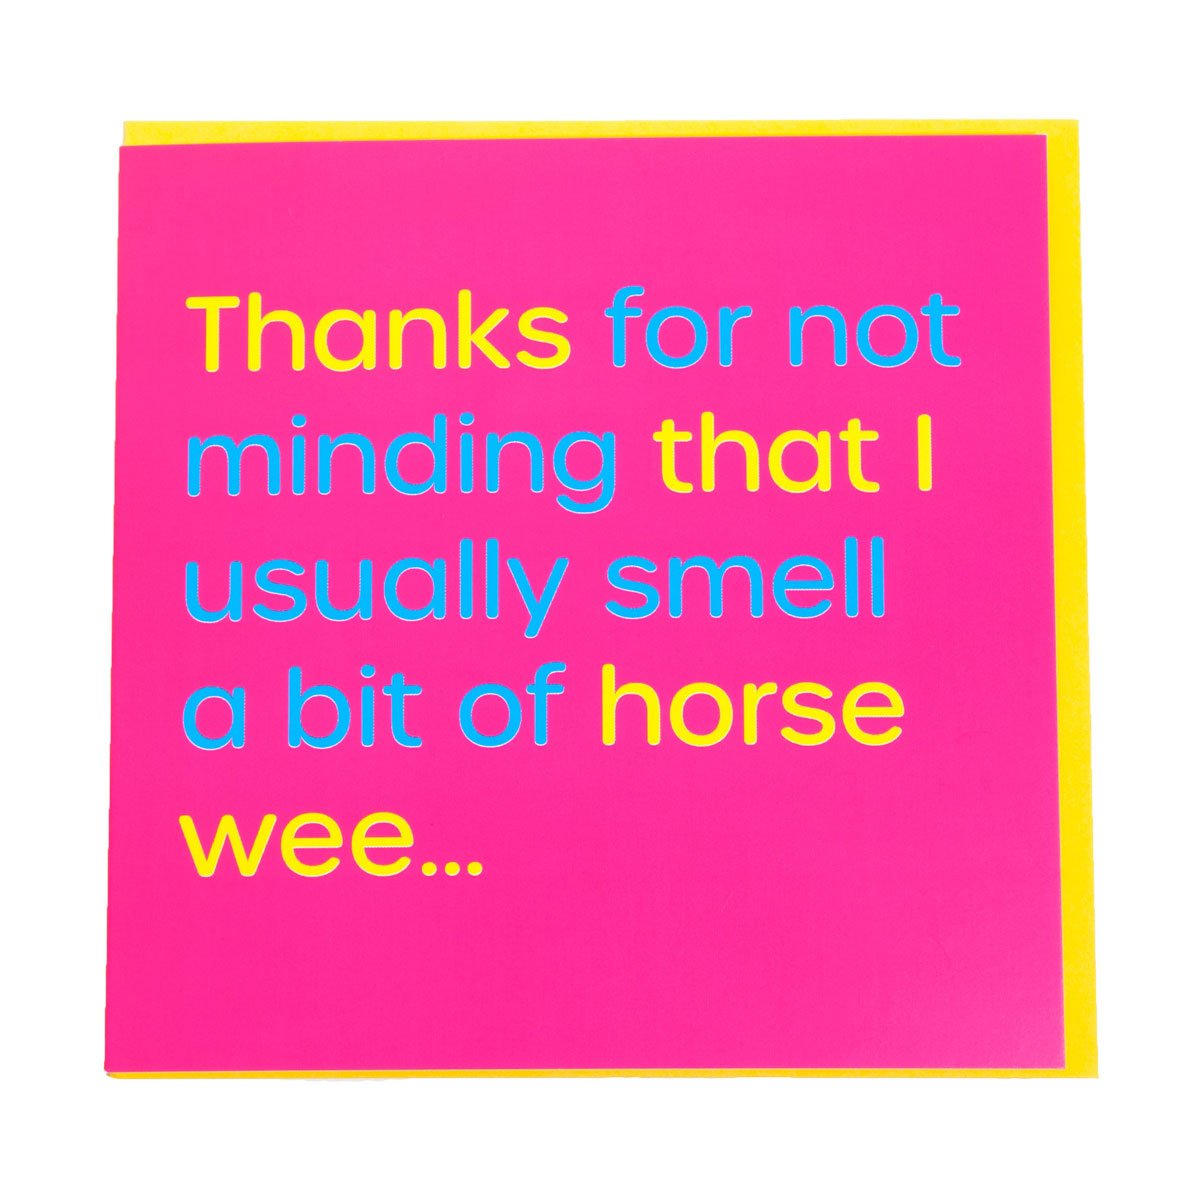 Gubblecote Humourous Greetings Card Gift Cards Barnstaple Equestrian Supplies